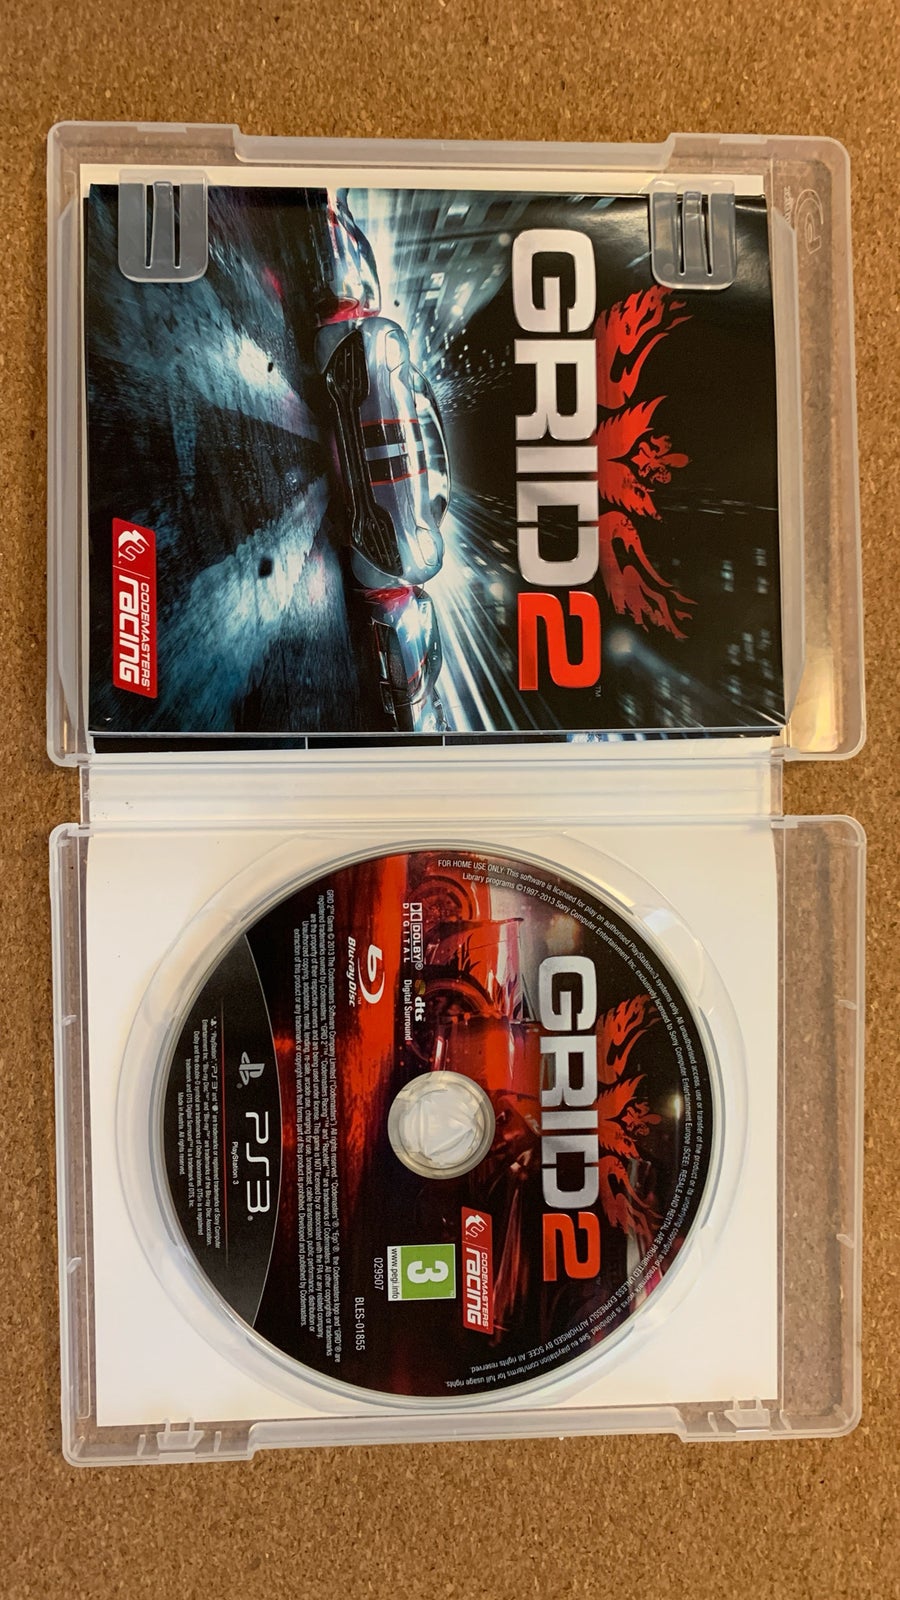 Grid 2 limited edition, PS3, racing